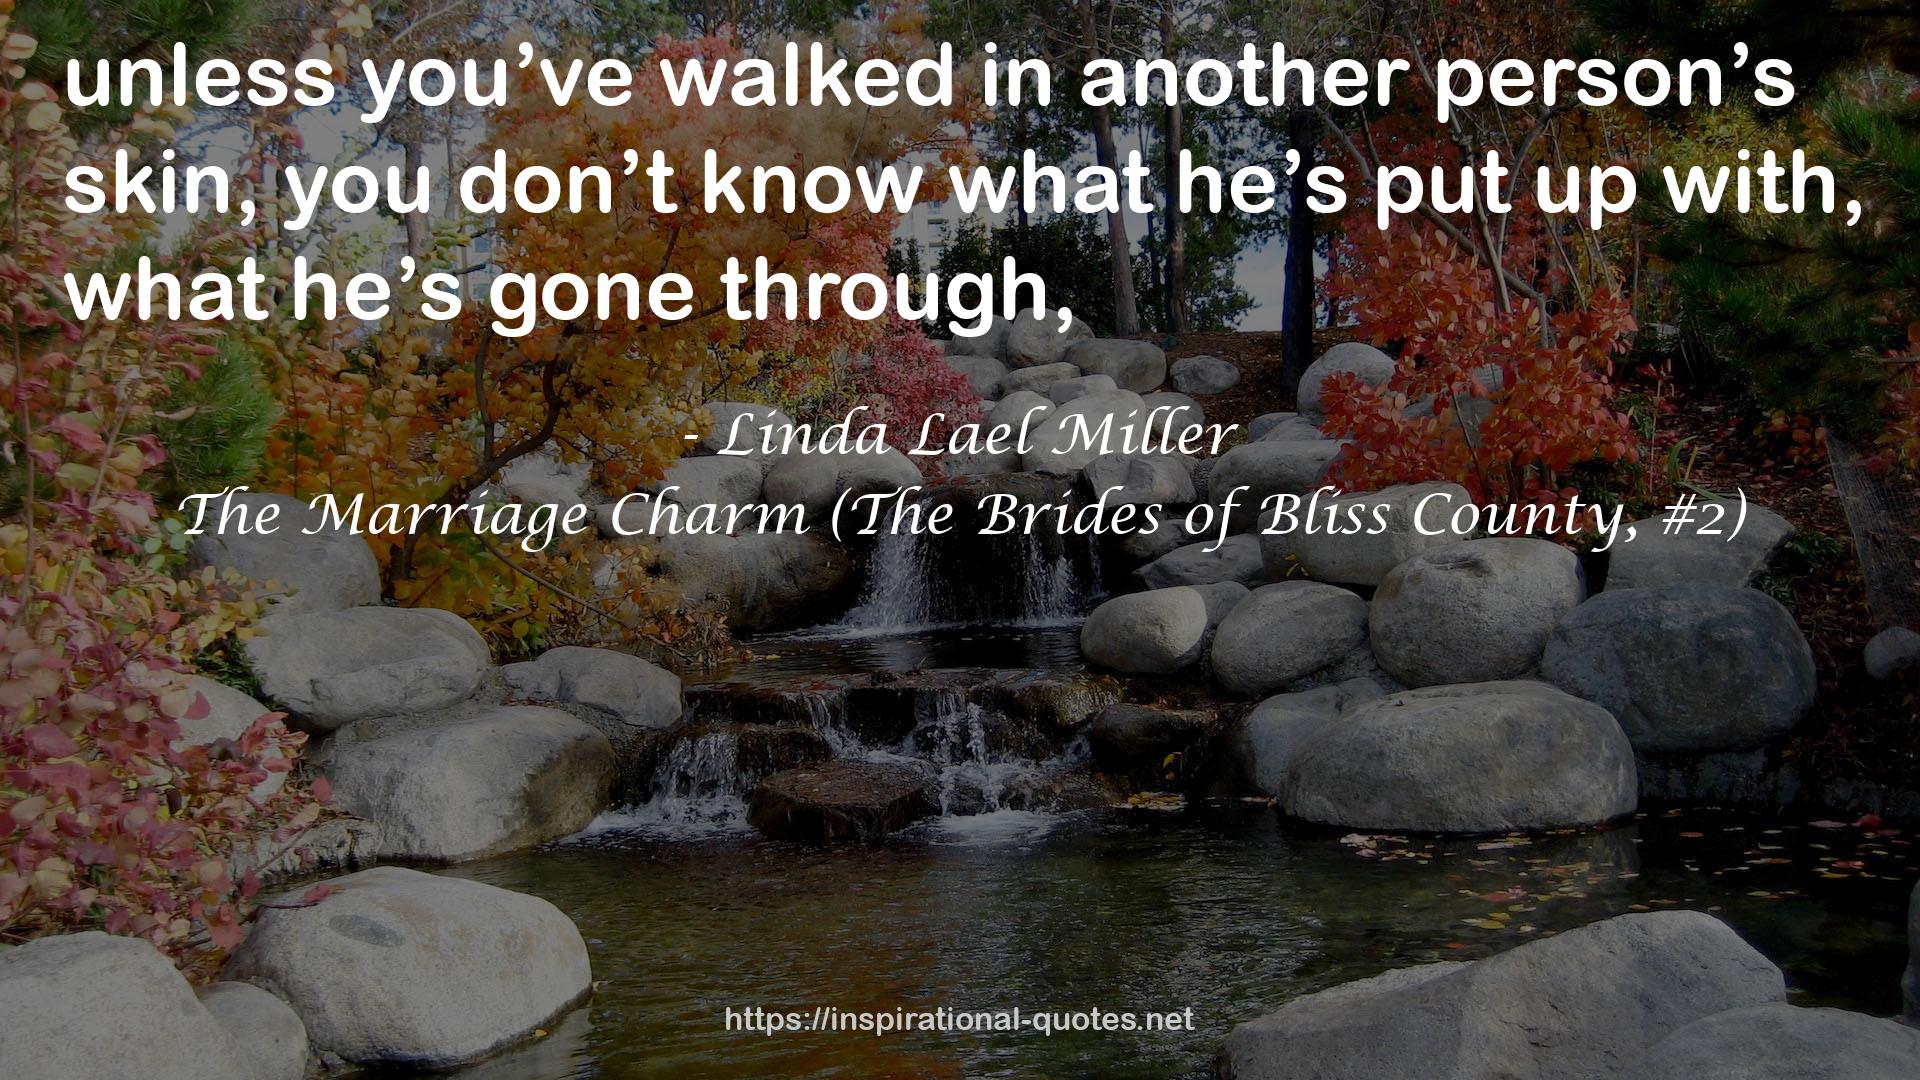 The Marriage Charm (The Brides of Bliss County, #2) QUOTES